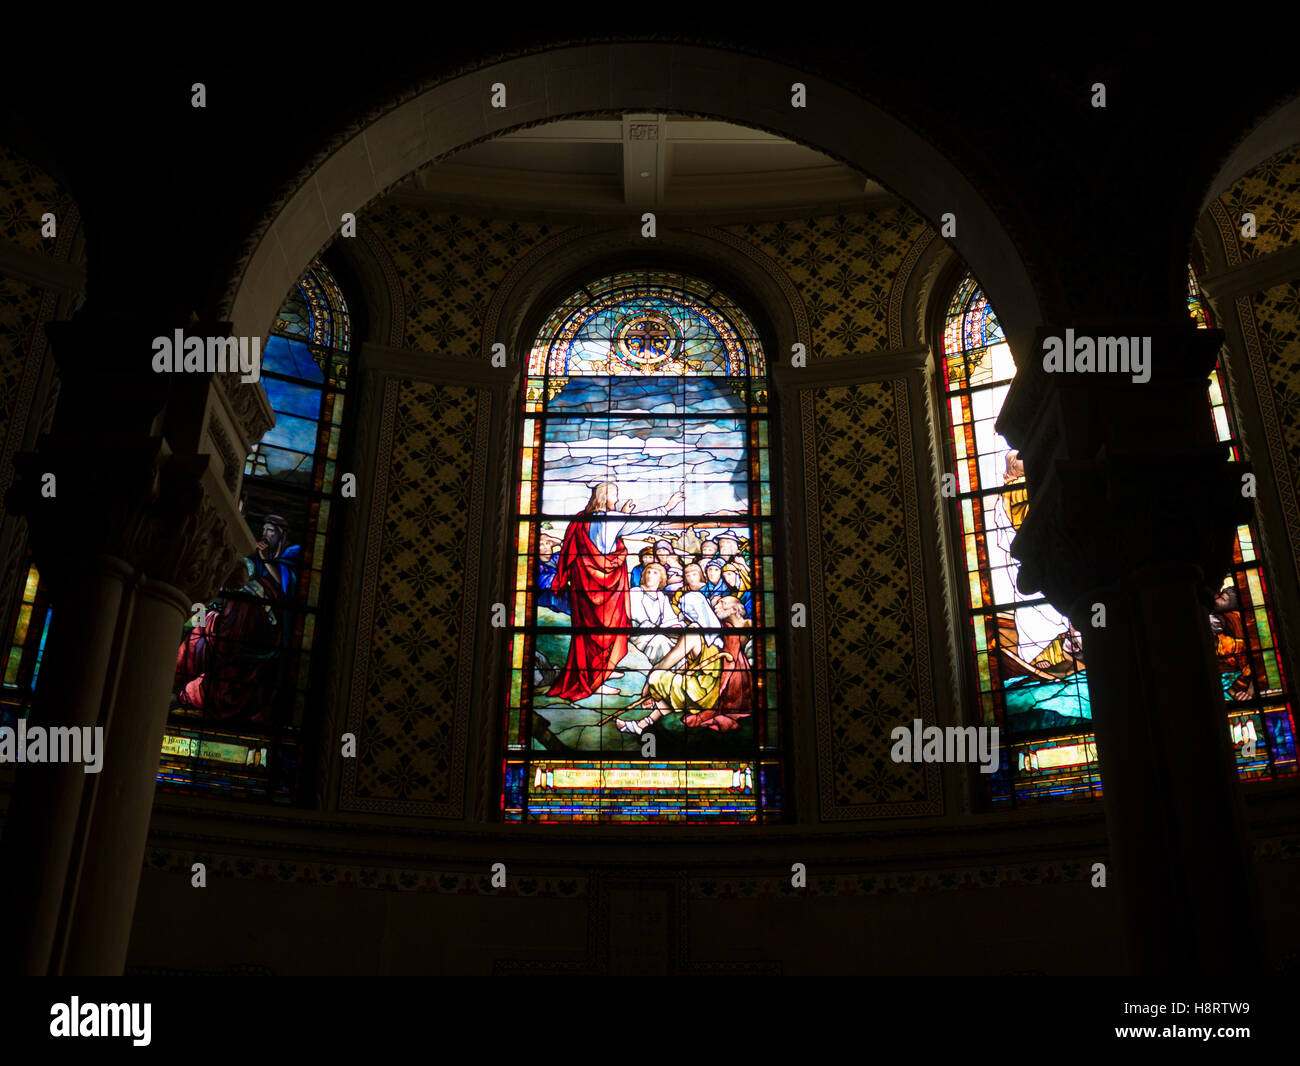 Memorial Church stained glass restored - Stanford Report